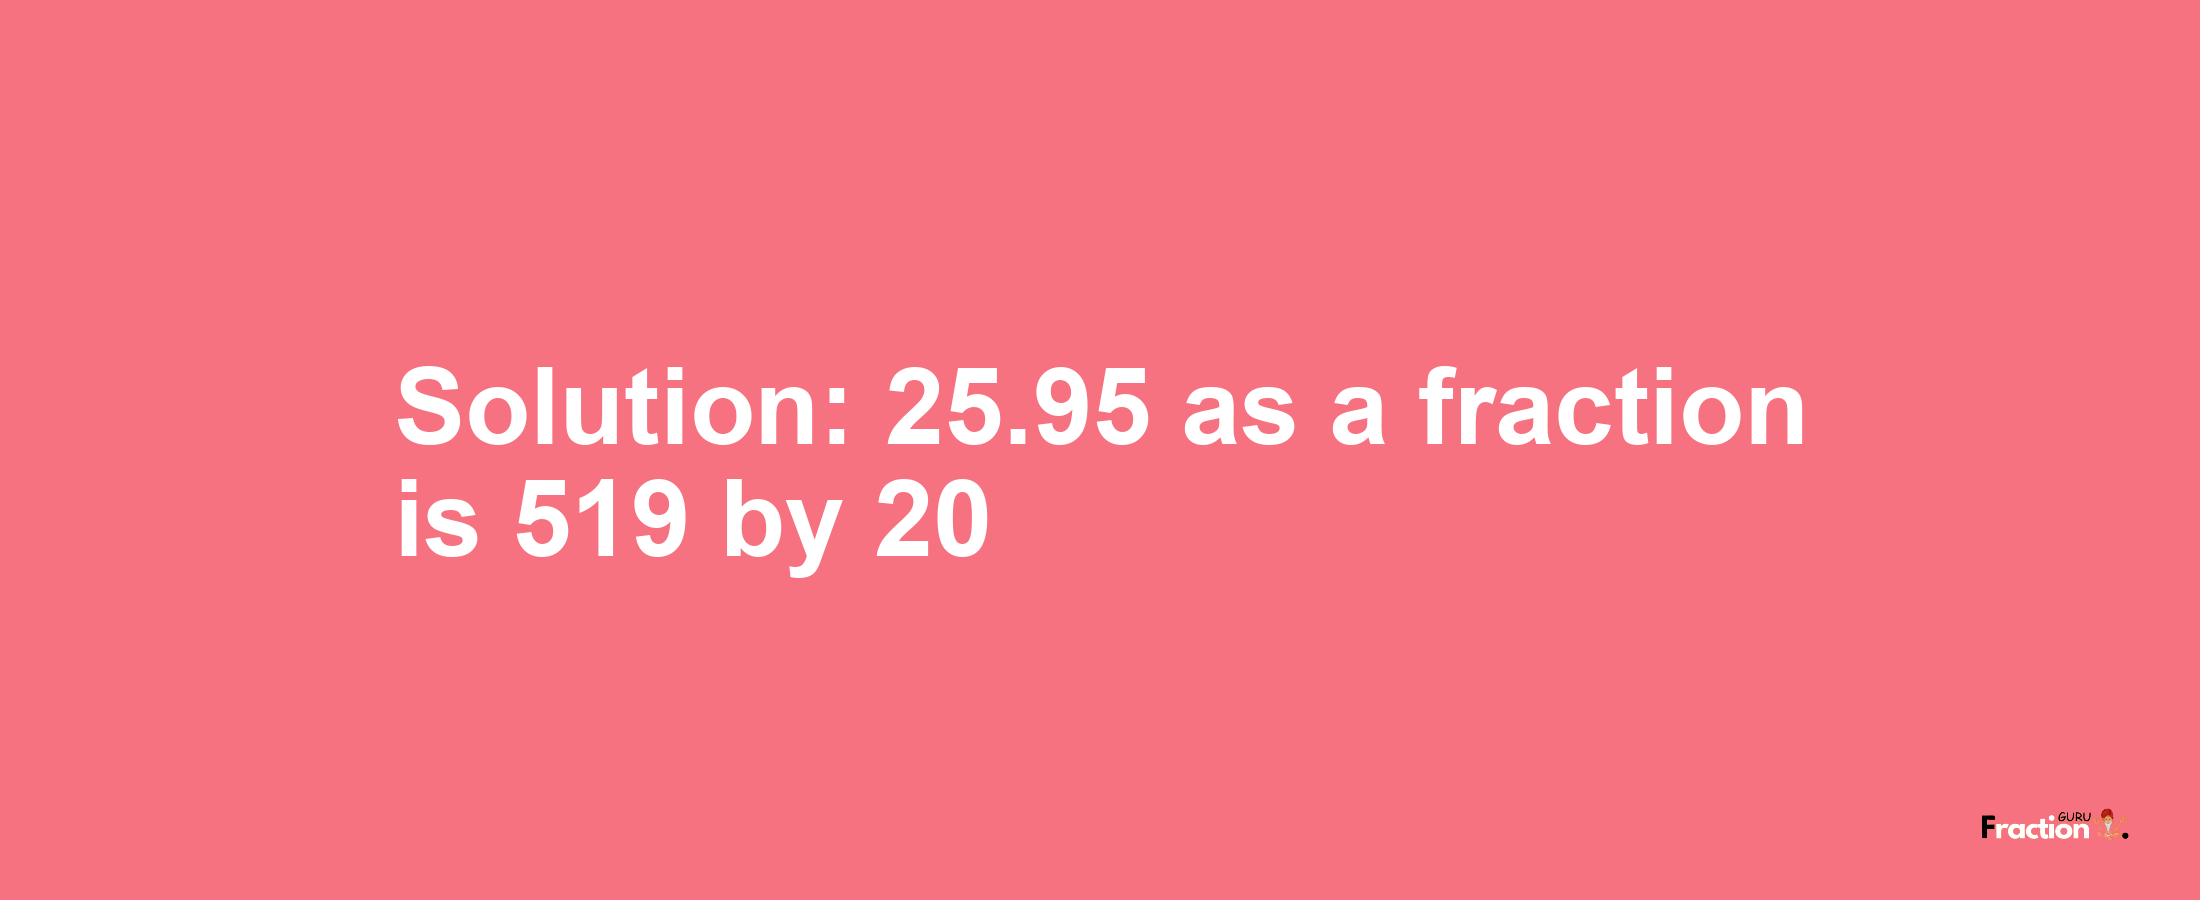 Solution:25.95 as a fraction is 519/20